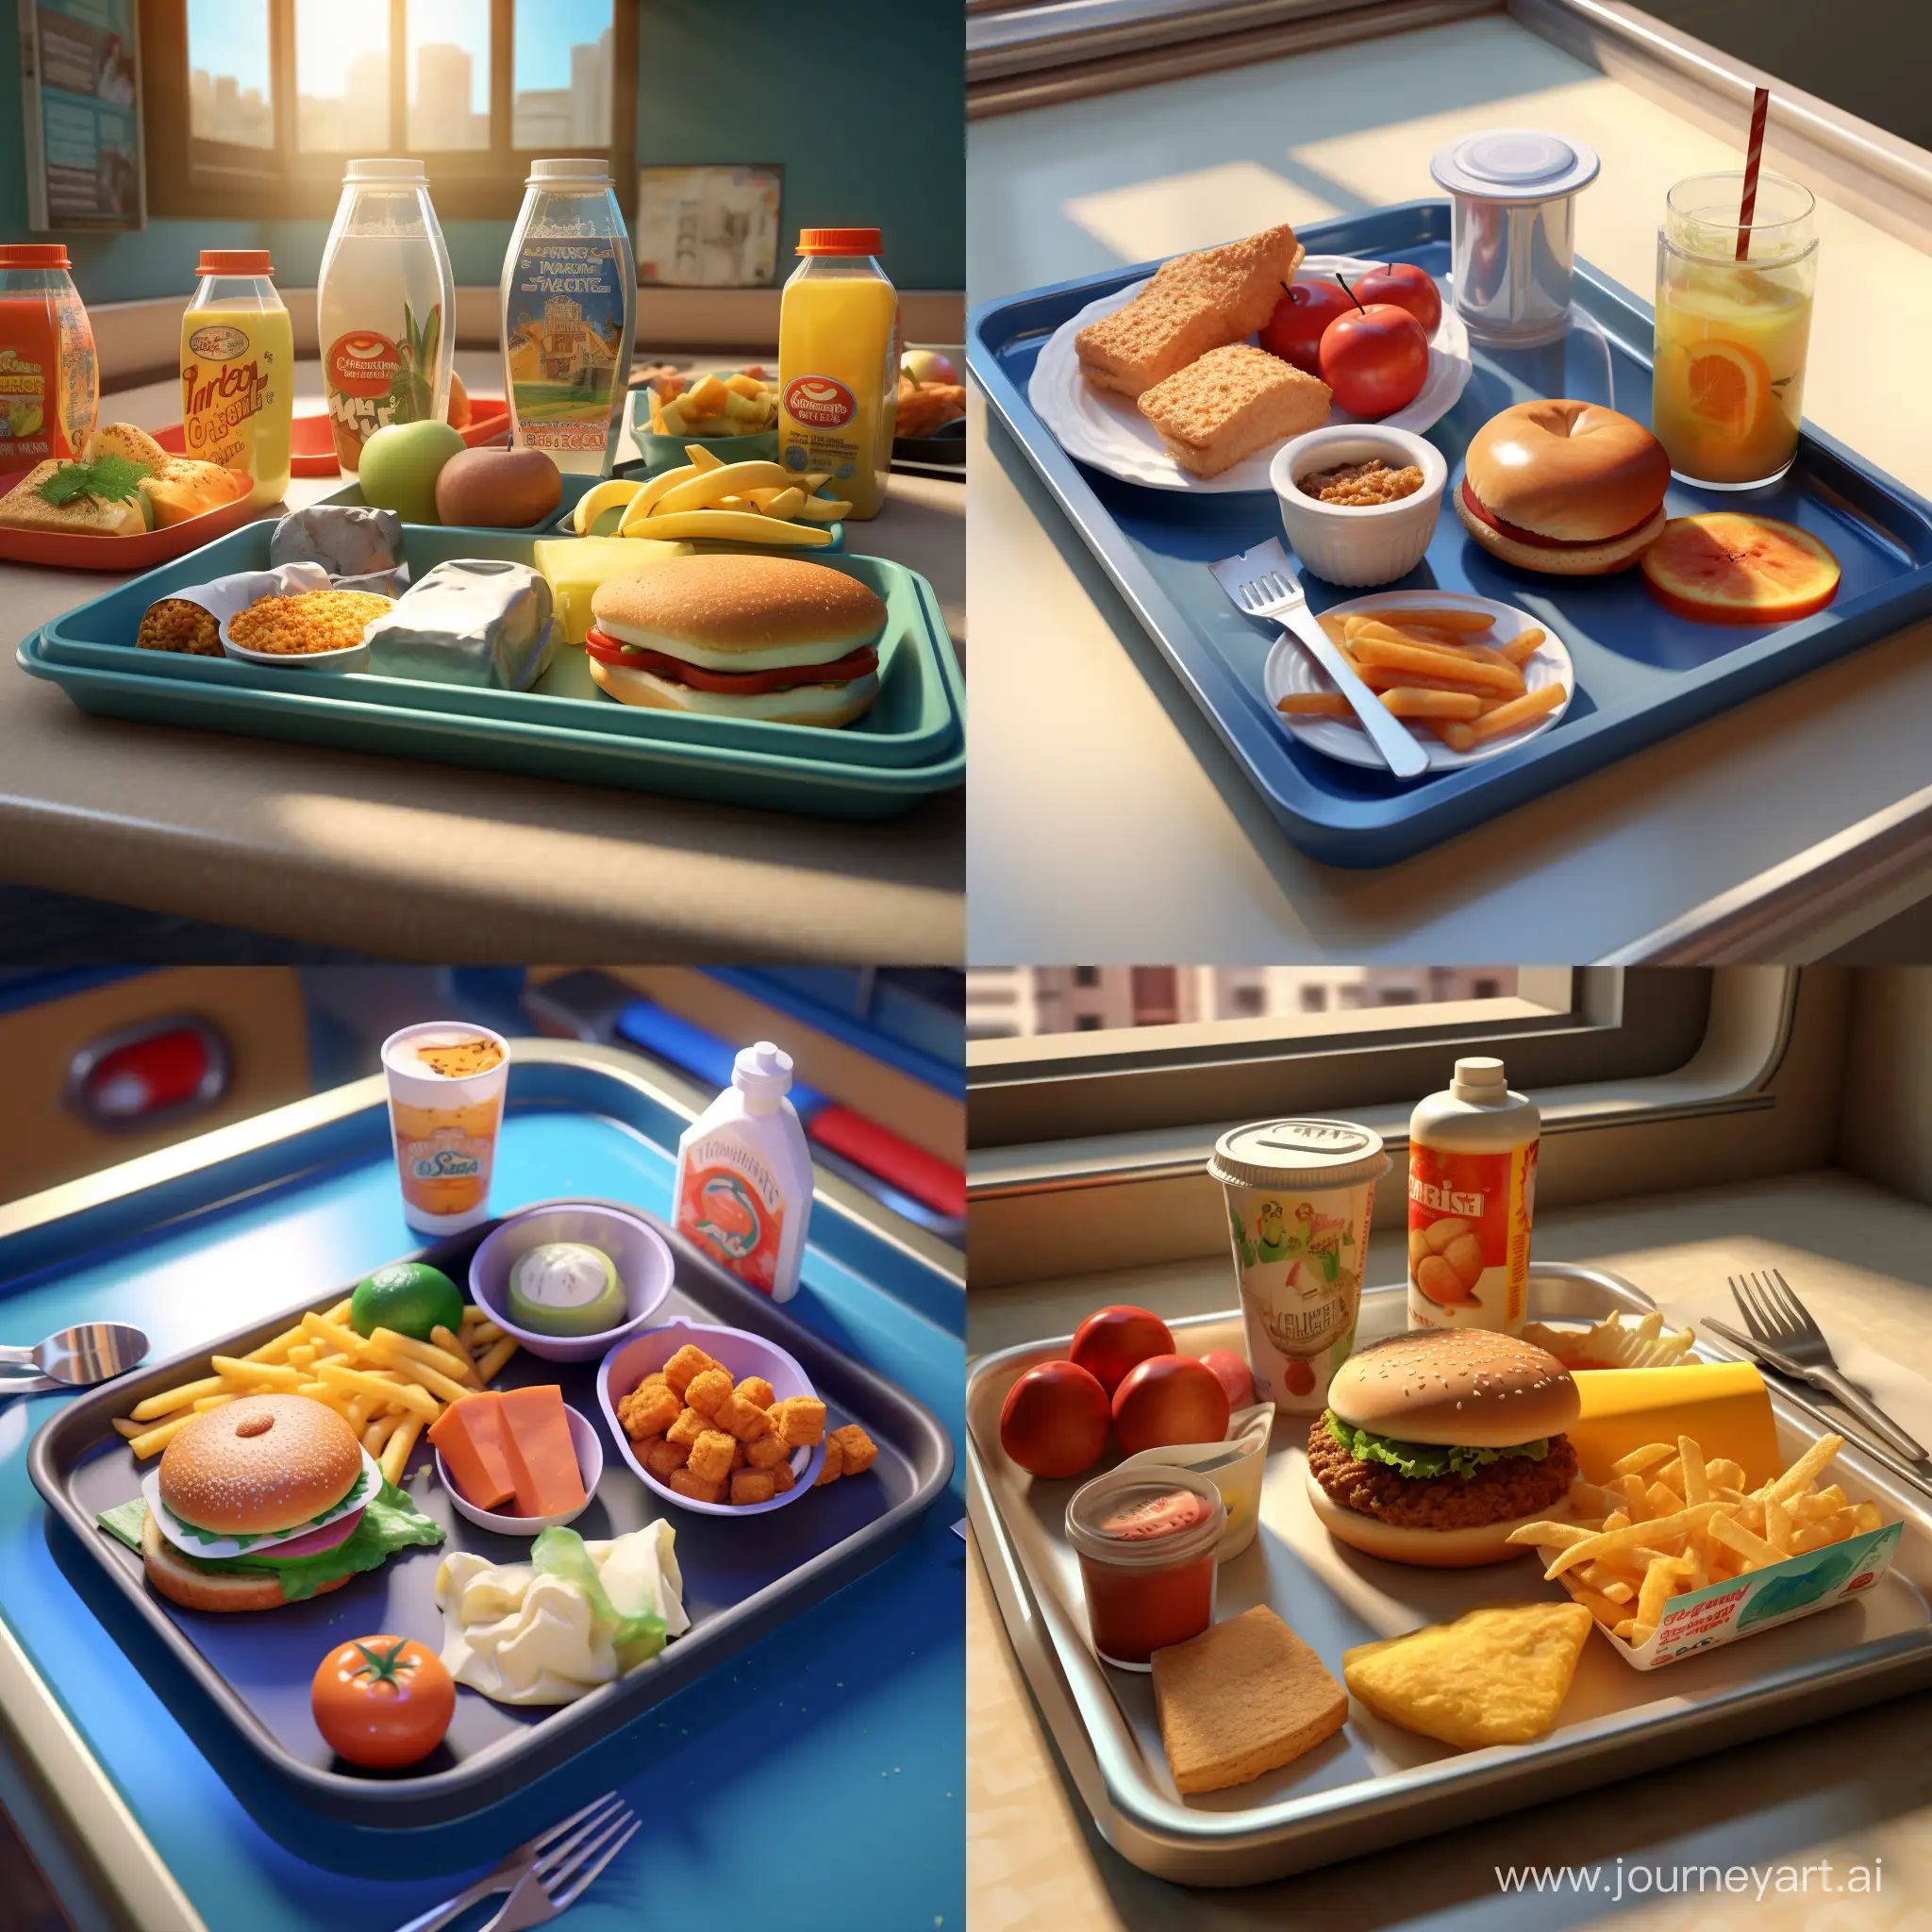 Colorful-3D-Animation-of-a-School-Lunch-Tray